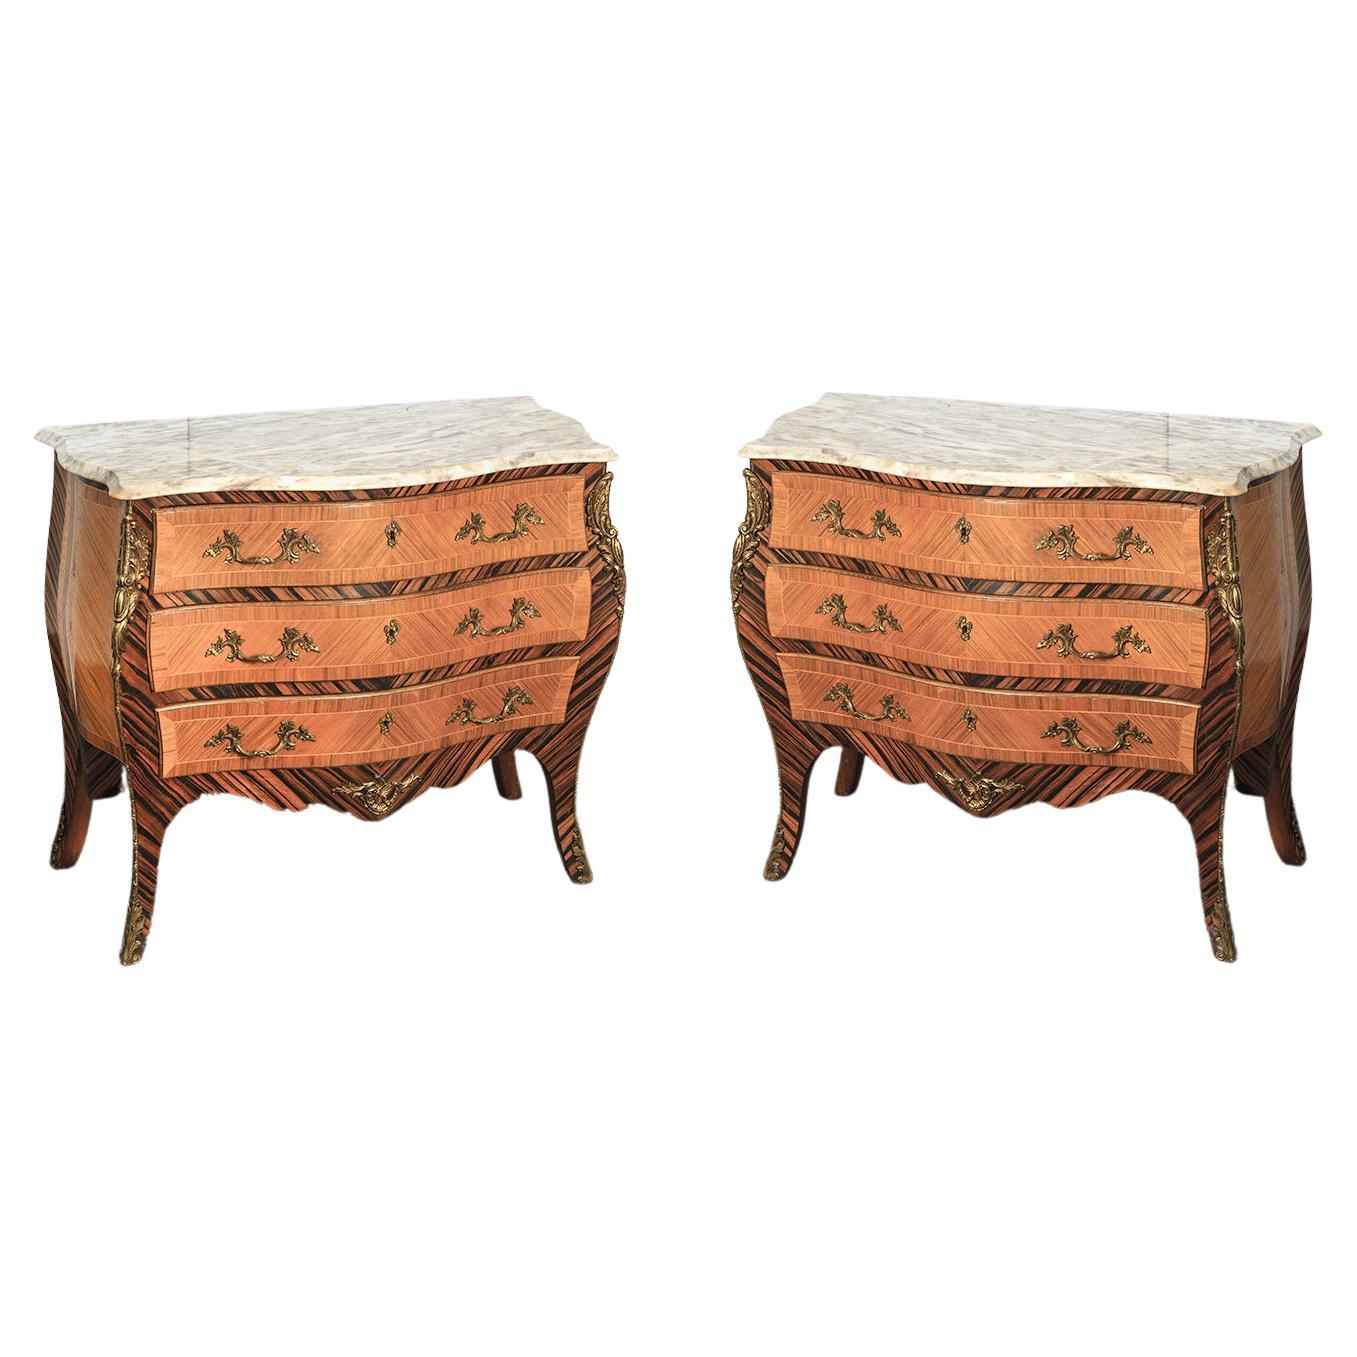 Pair of French Marble Top Commodes